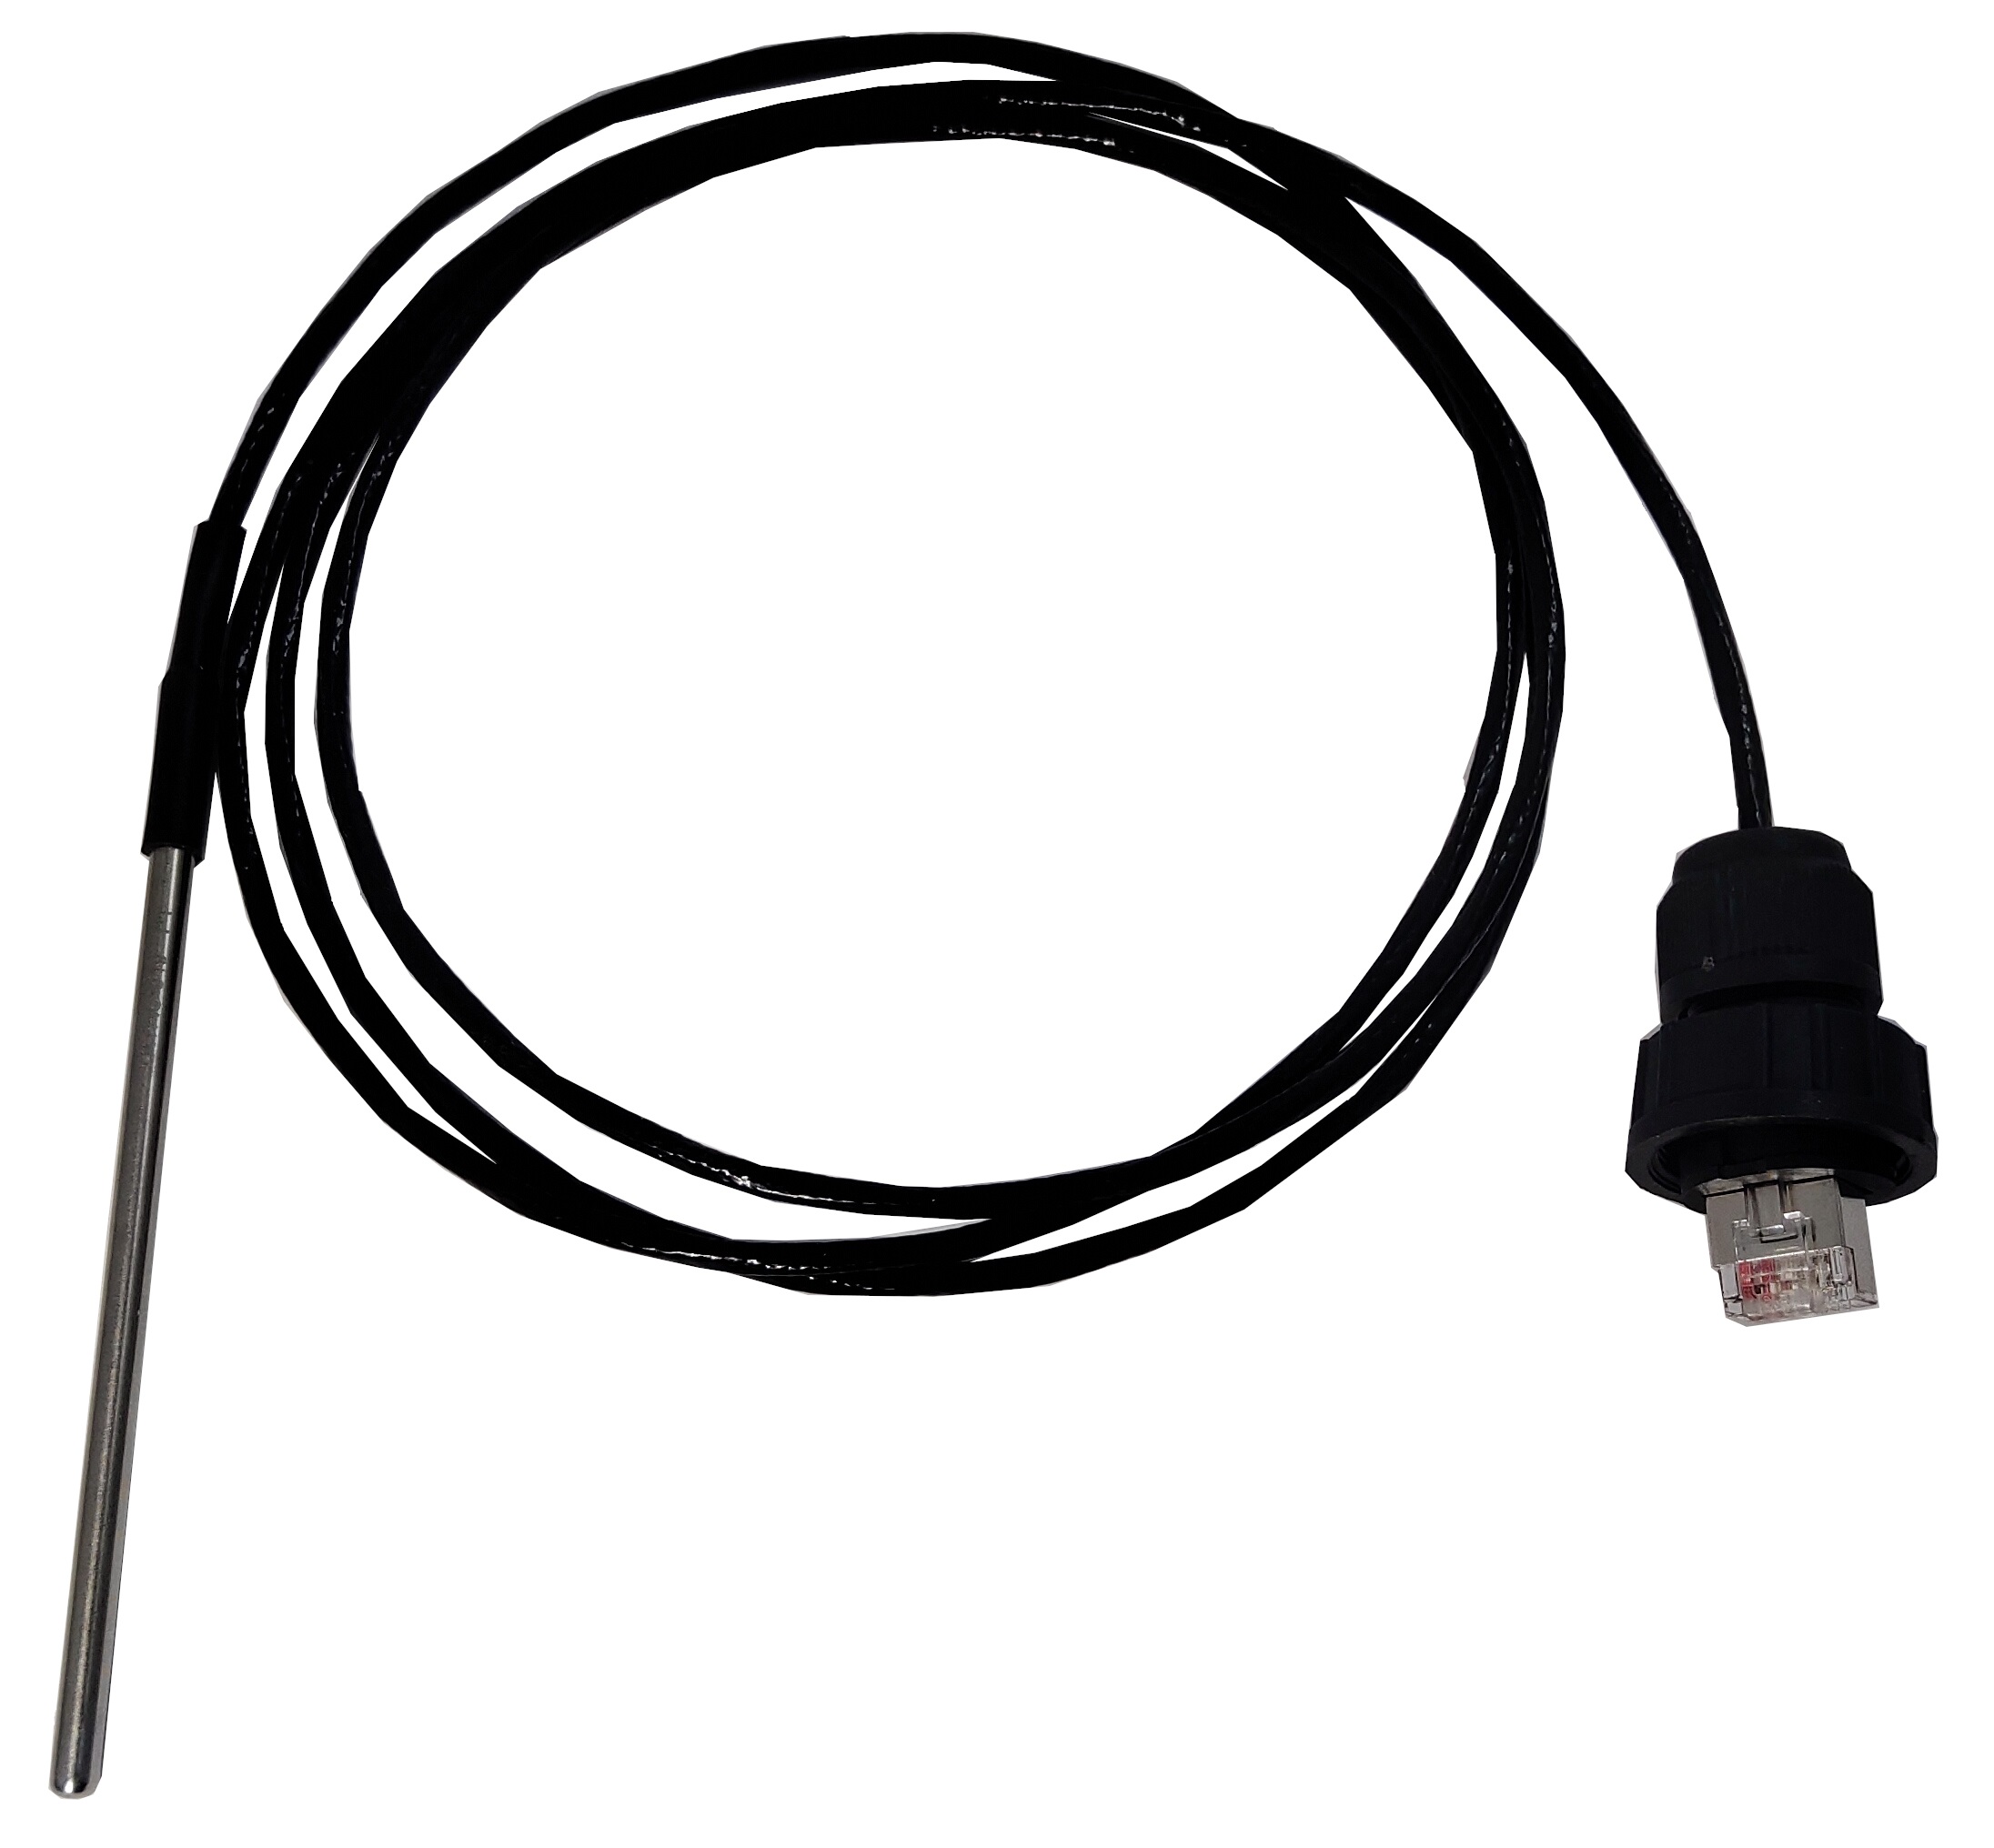 https://d2g2p0i8cc2bmh.cloudfront.net/2020-03/RS1xx%20RTD%20Temp%20Sensor%20Ext.%20Probe%20-%20Cable%20Assembly%20Only.jpg